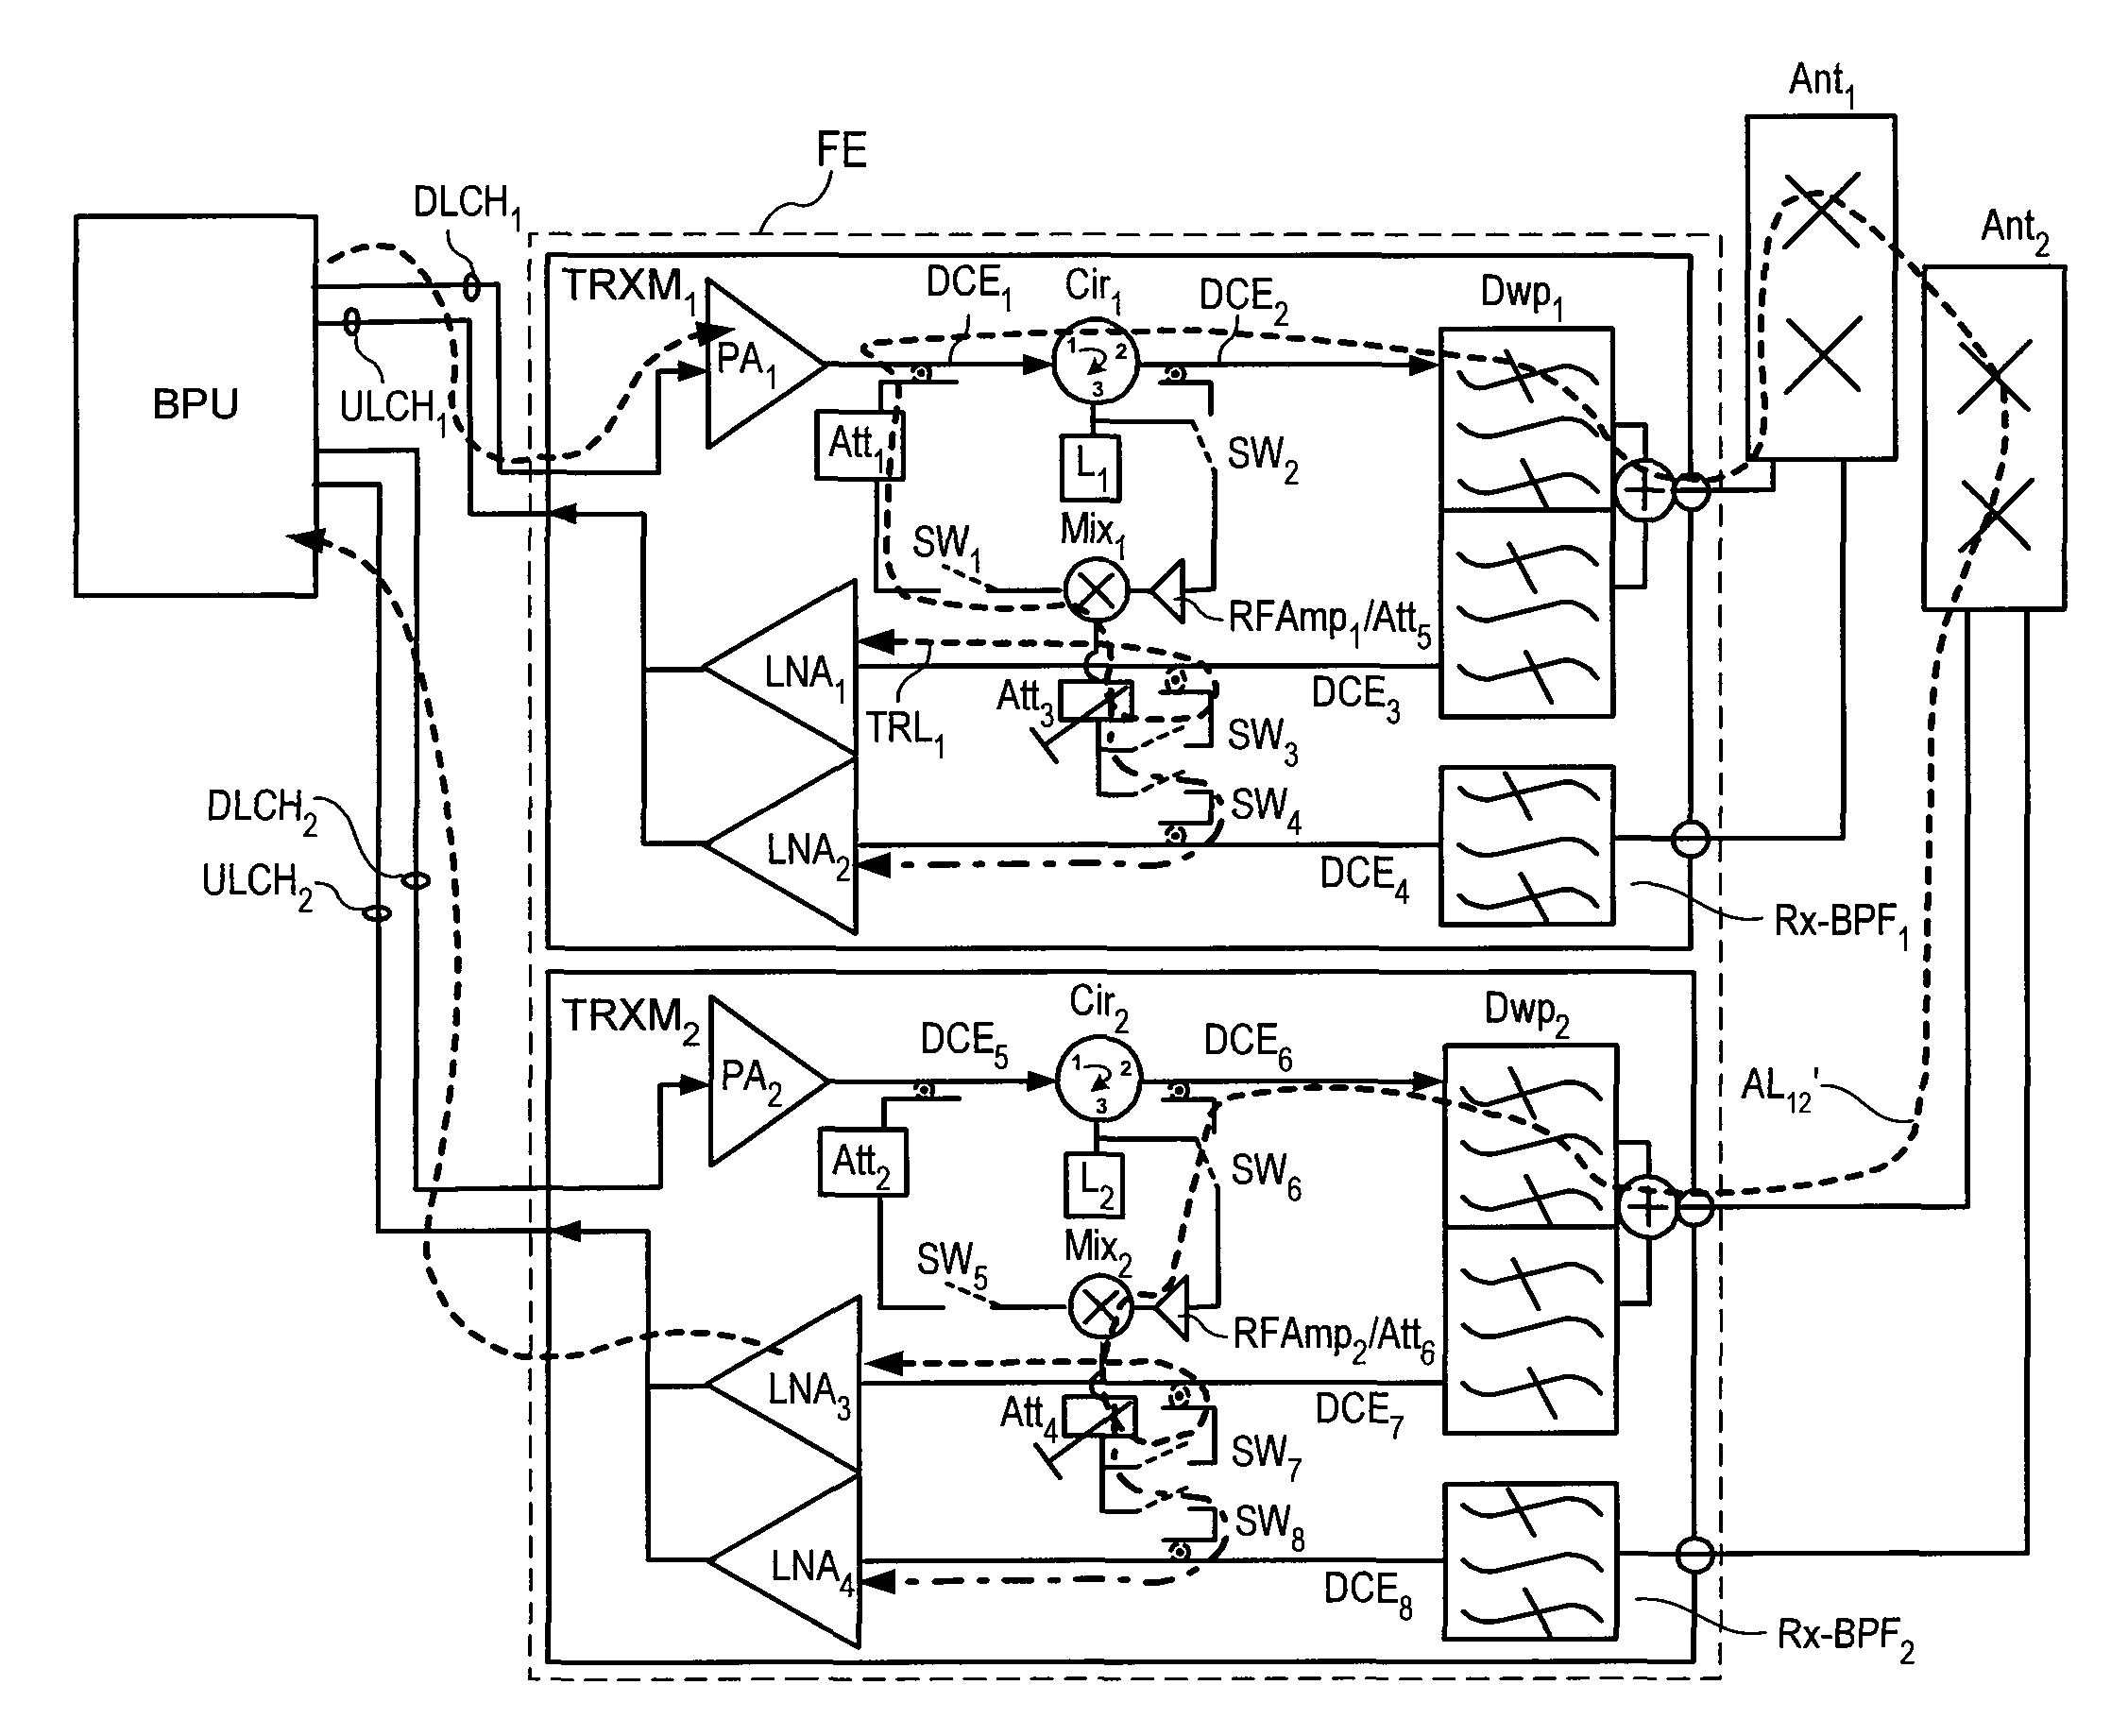 Multi-transceiver architecture for advanced Tx antenna monitoring and calibration in MIMO and smart antenna communication systems